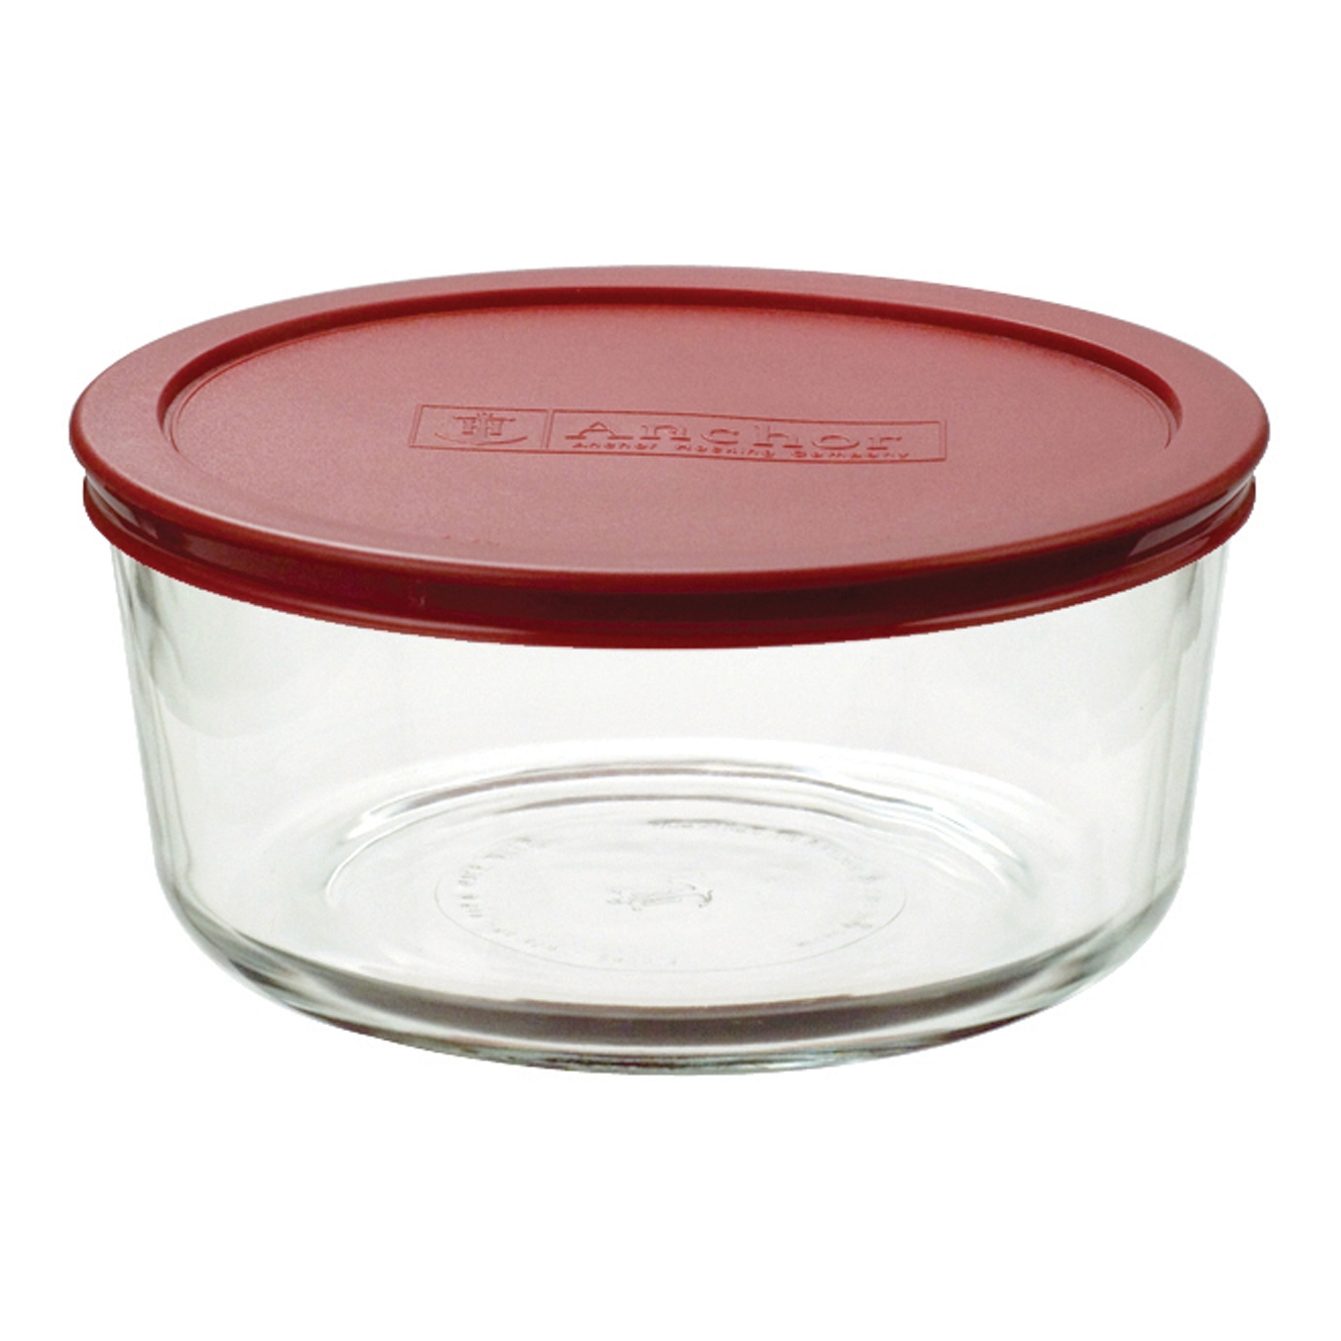 ROUND GLASS RED LIDDED TRAY 1.7L